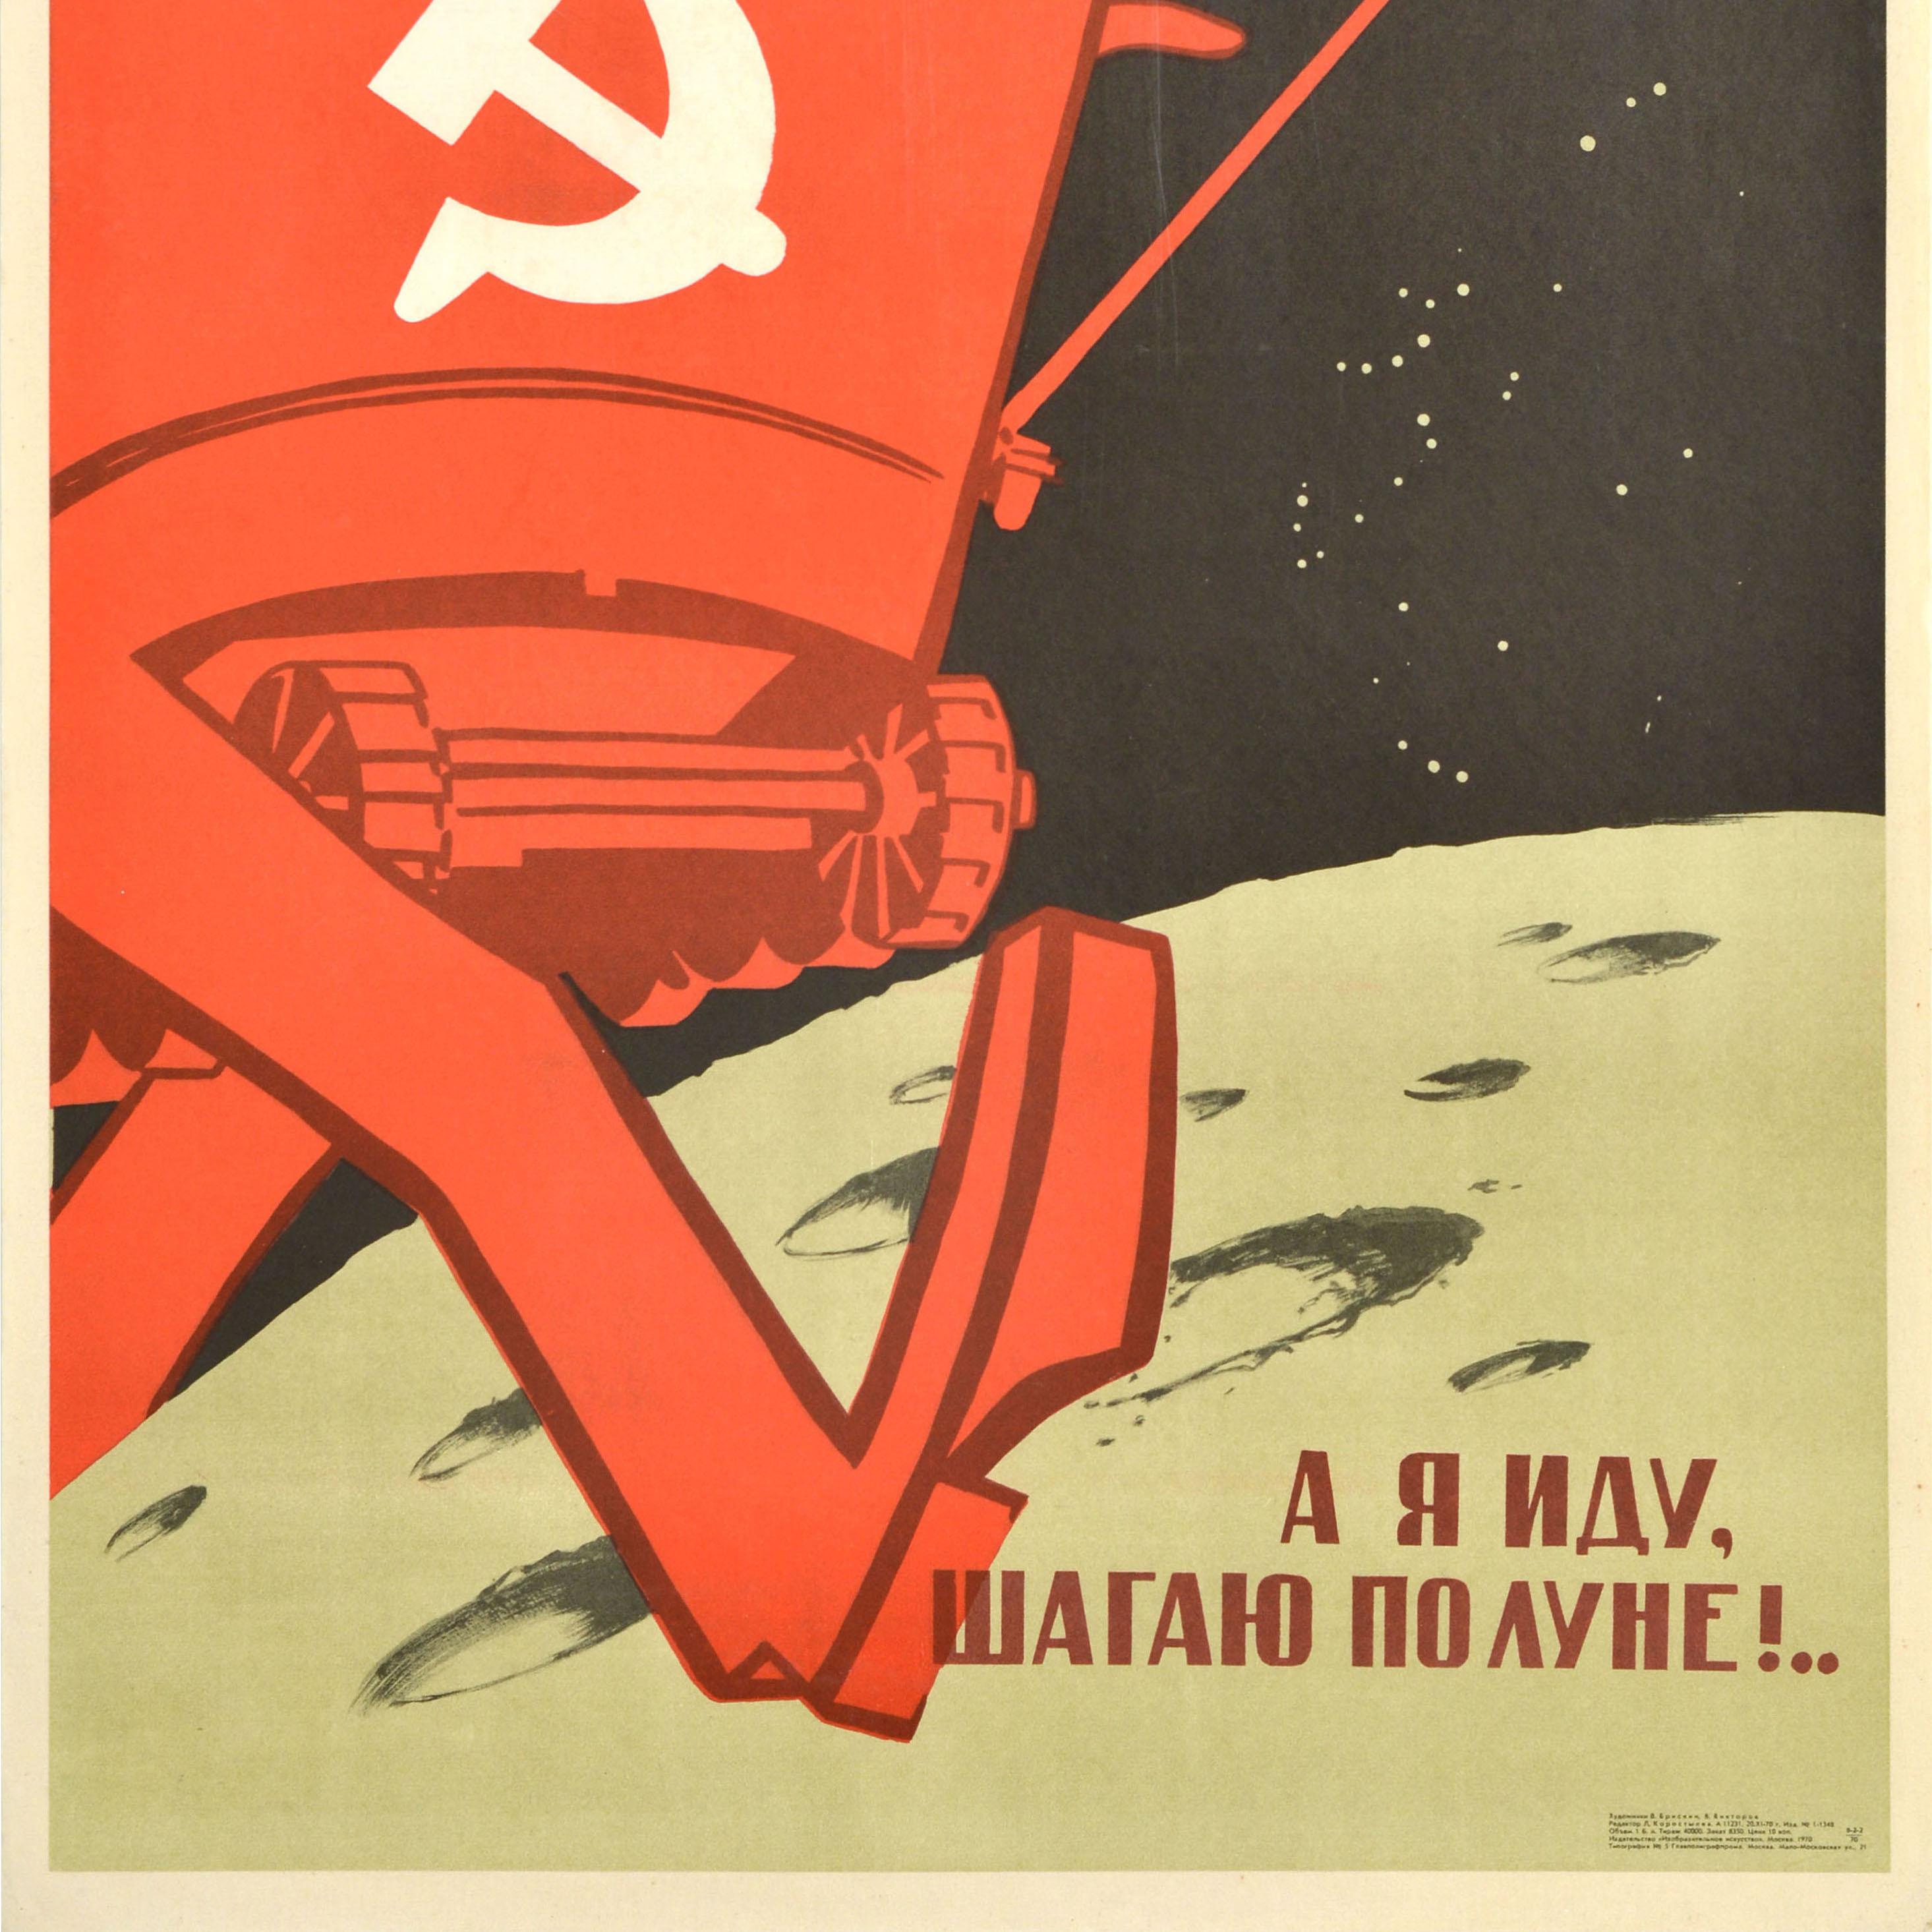 Original vintage Soviet propaganda poster - I am walking on the moon! - featuring a fun illustration of a smiling Lunokhod lunar rover walking on the moon and smoking a cigarette with the phrase mimicking a popular USSR film title and song Walking